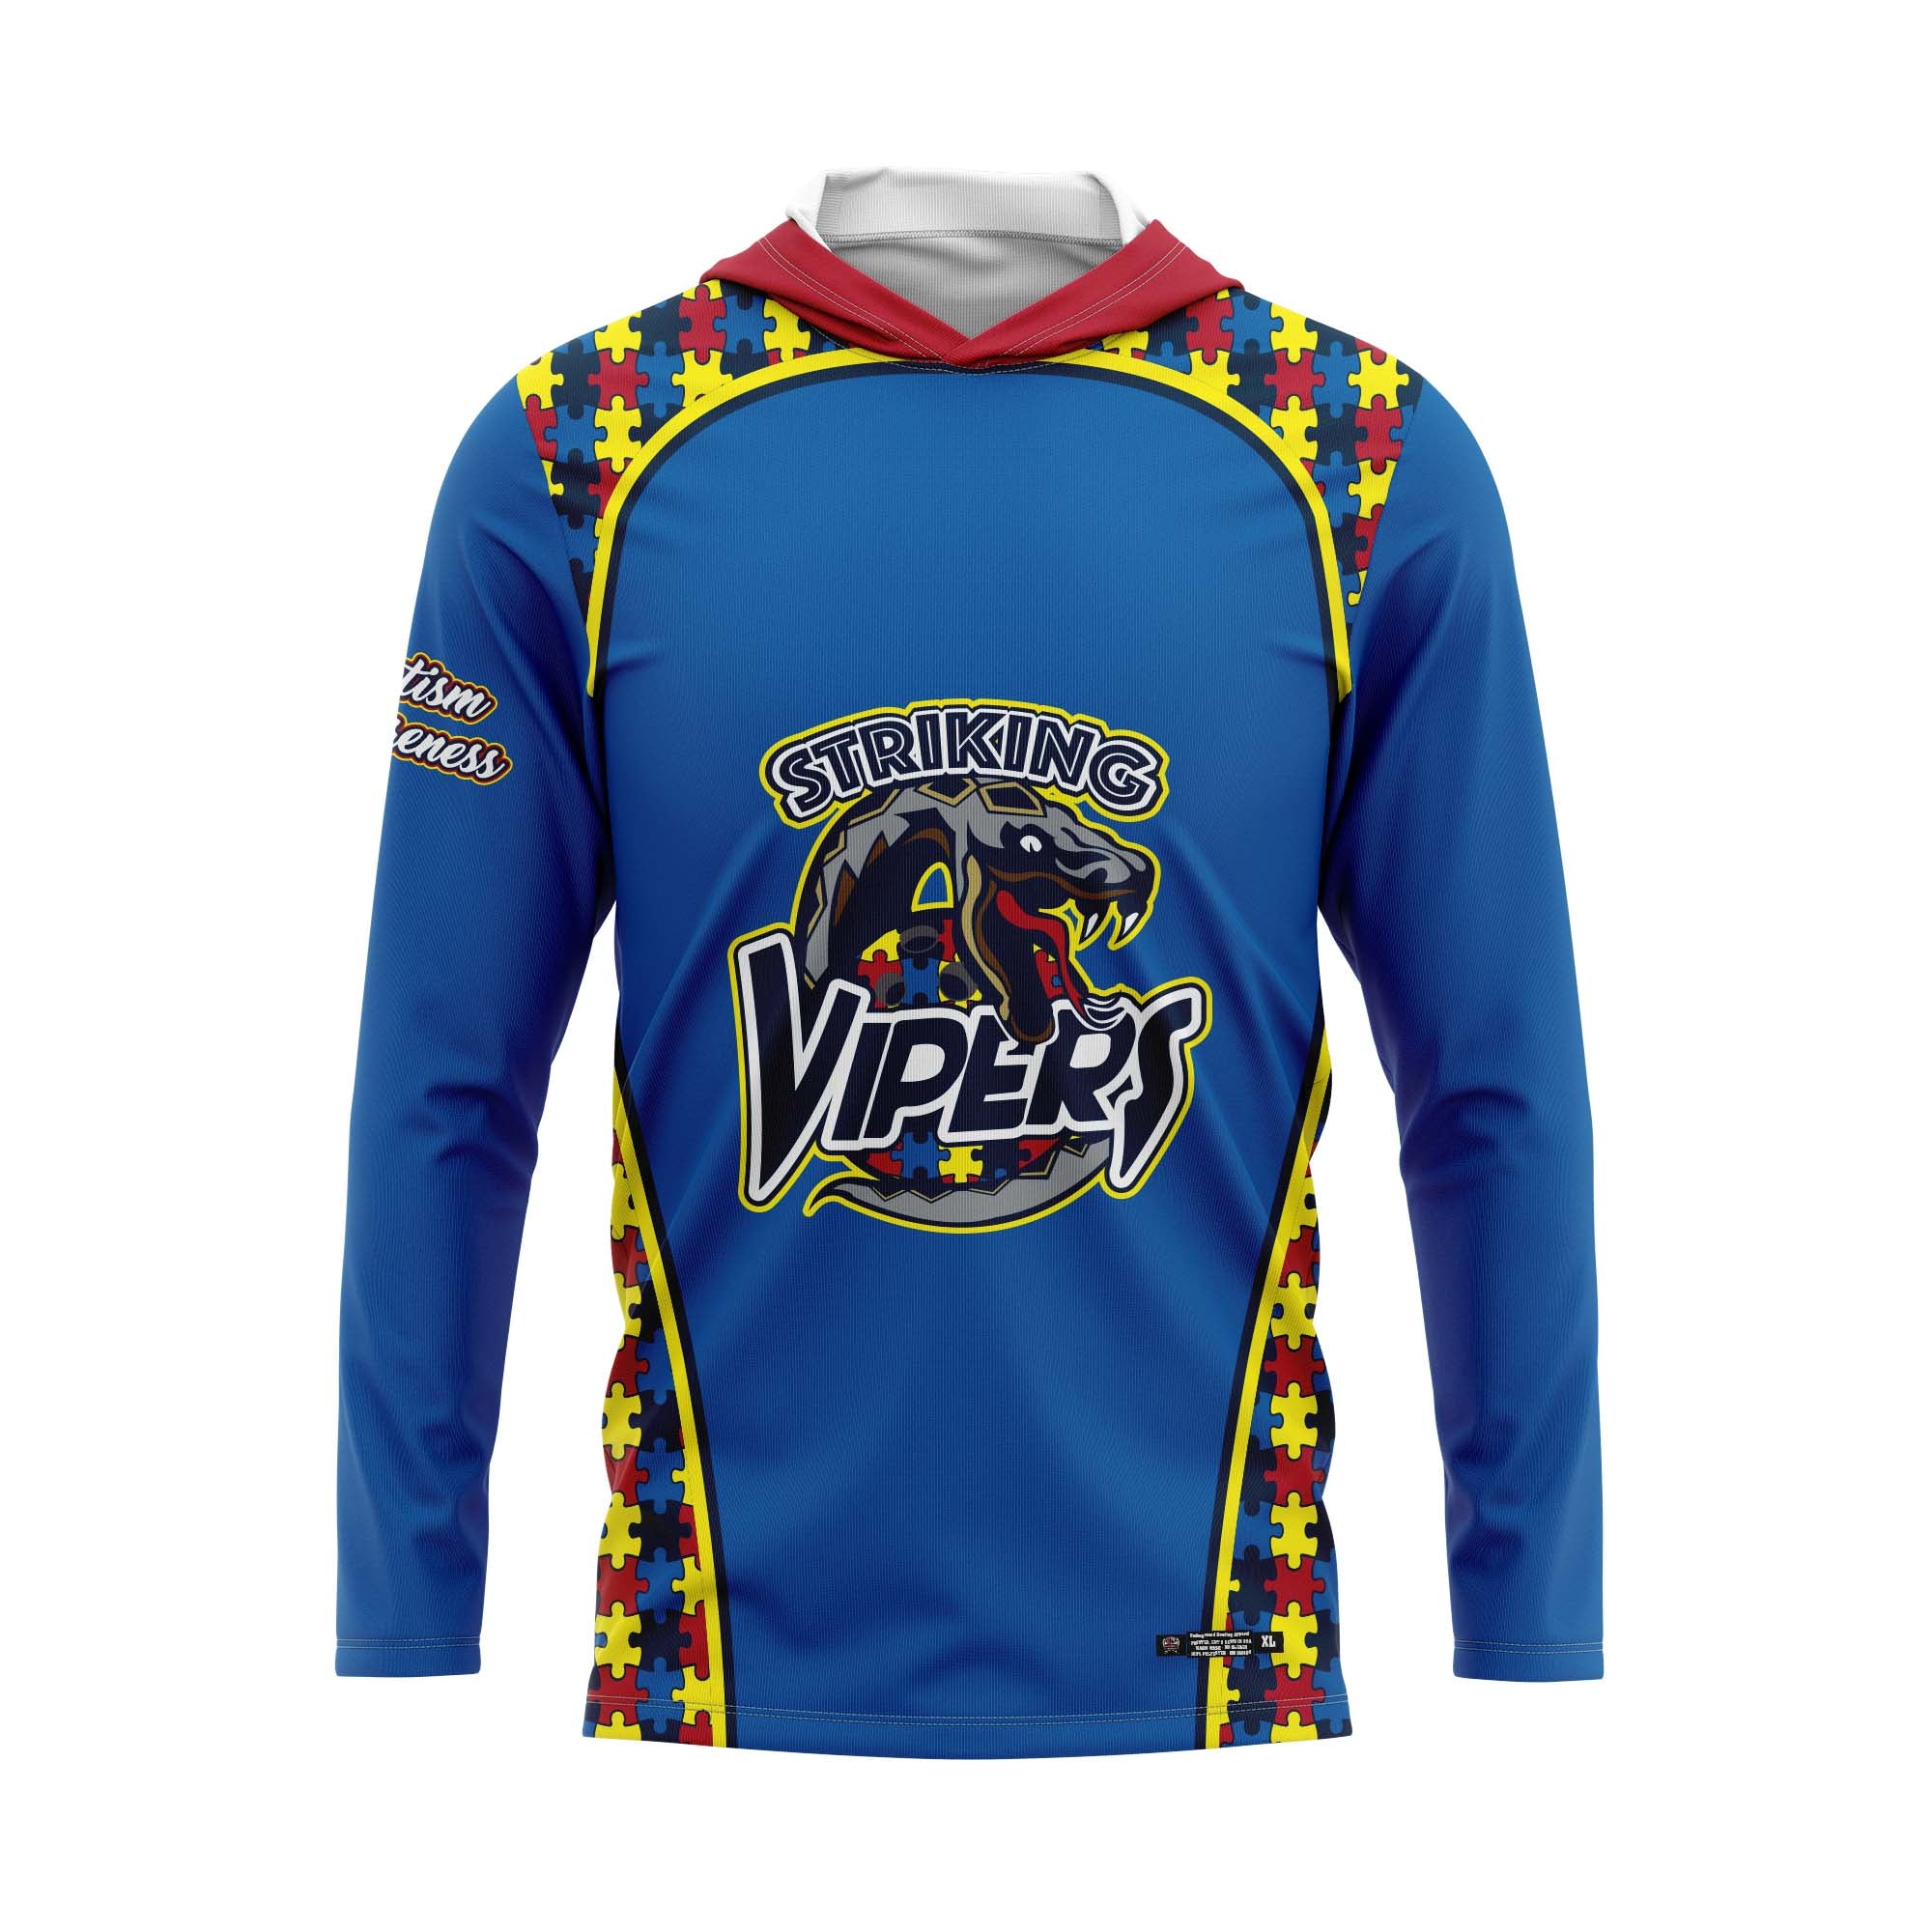 Striking Vipers Autism Jersey